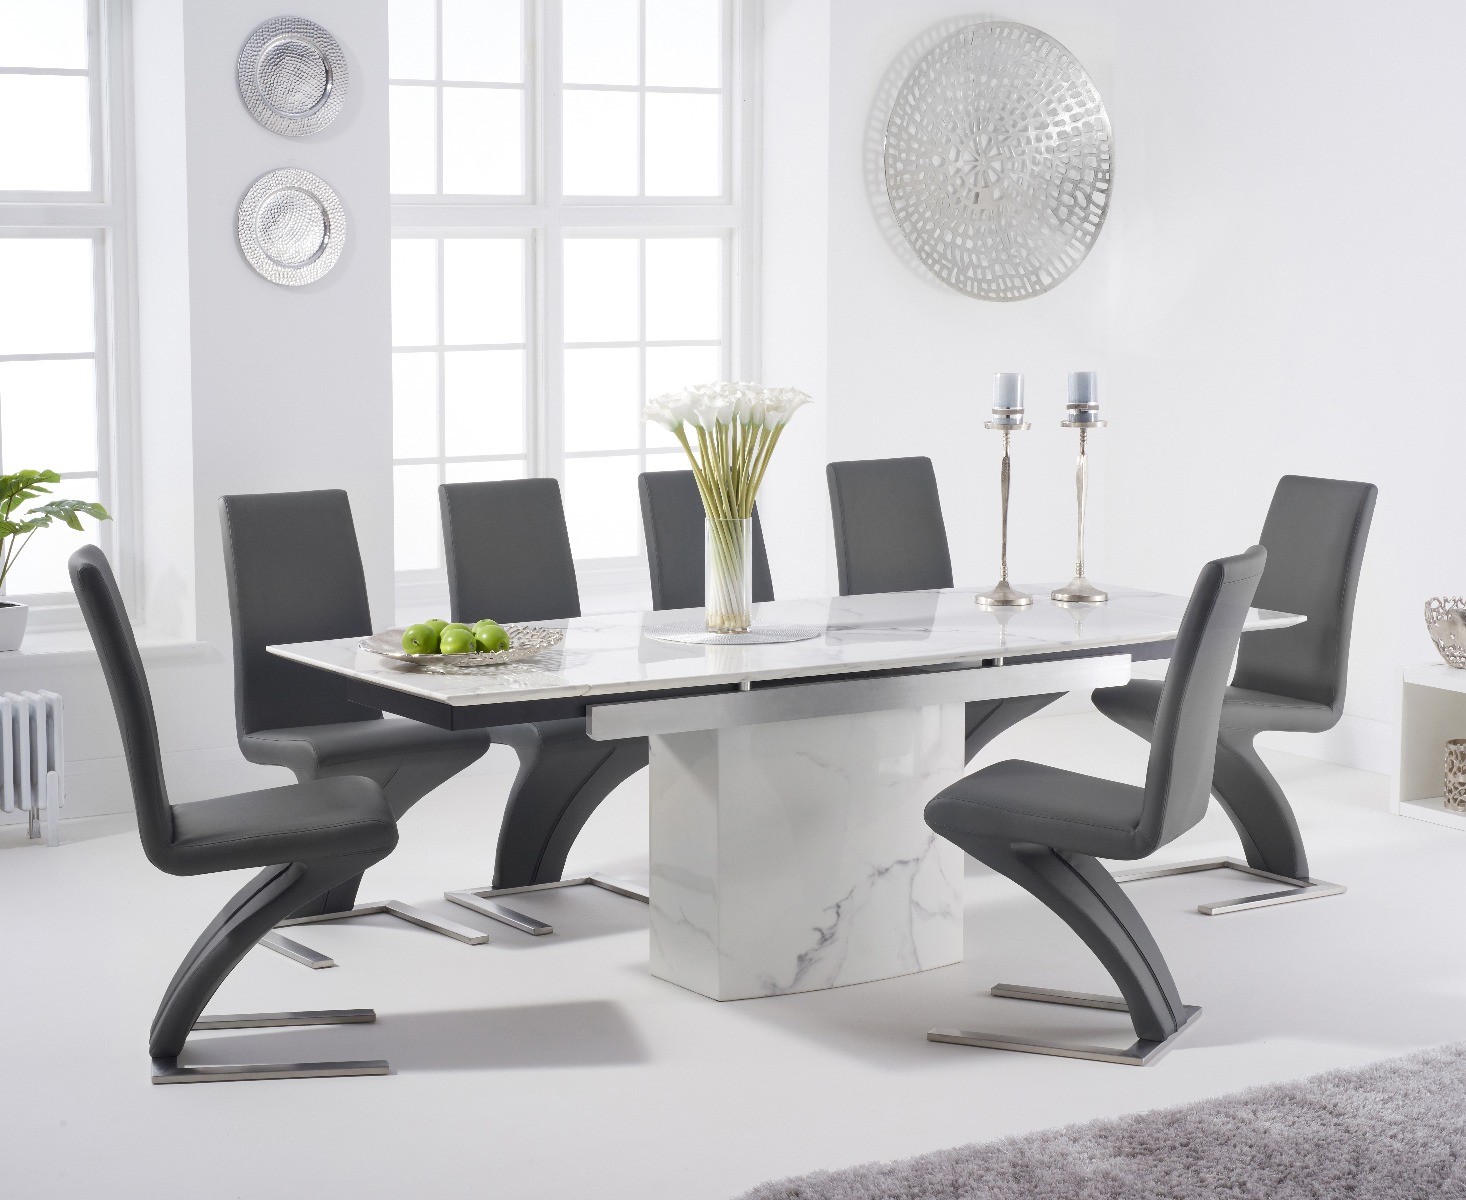 Photo 2 of Extending savona 160cm white marble dining table with 4 black aldo chairs